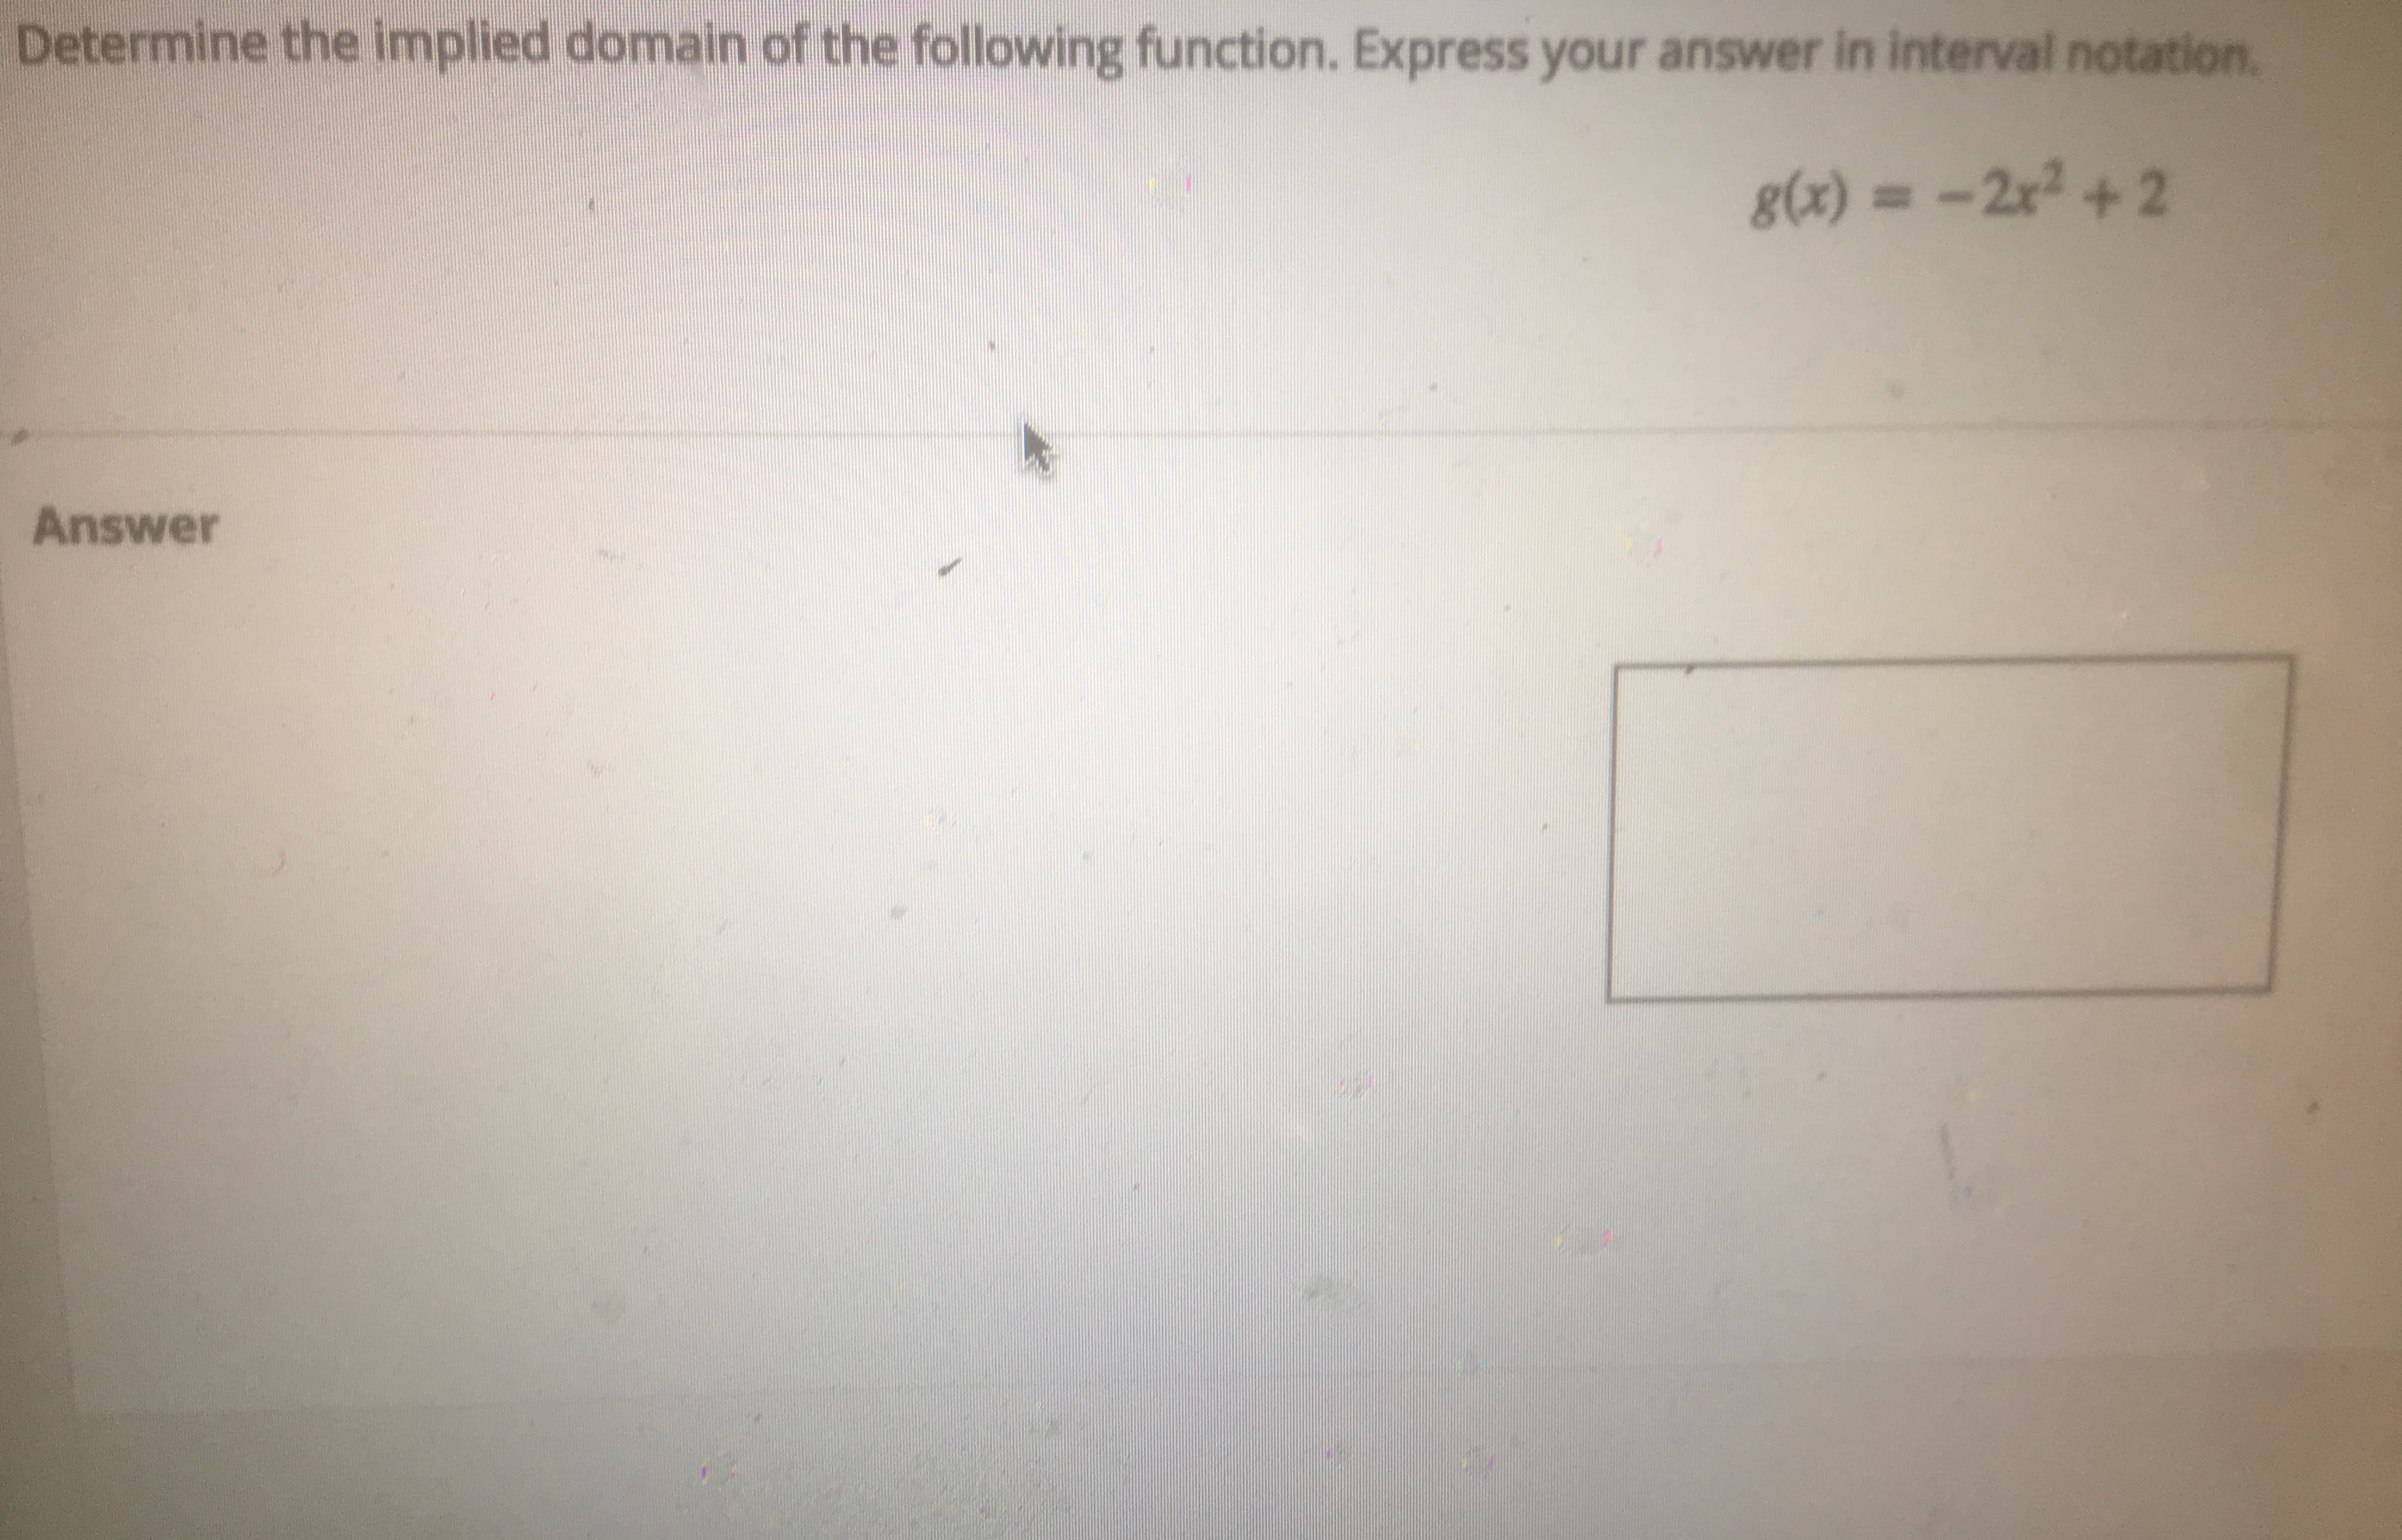 Determine the implied domain of the following function. Express your answer in interval notation.
Answer
